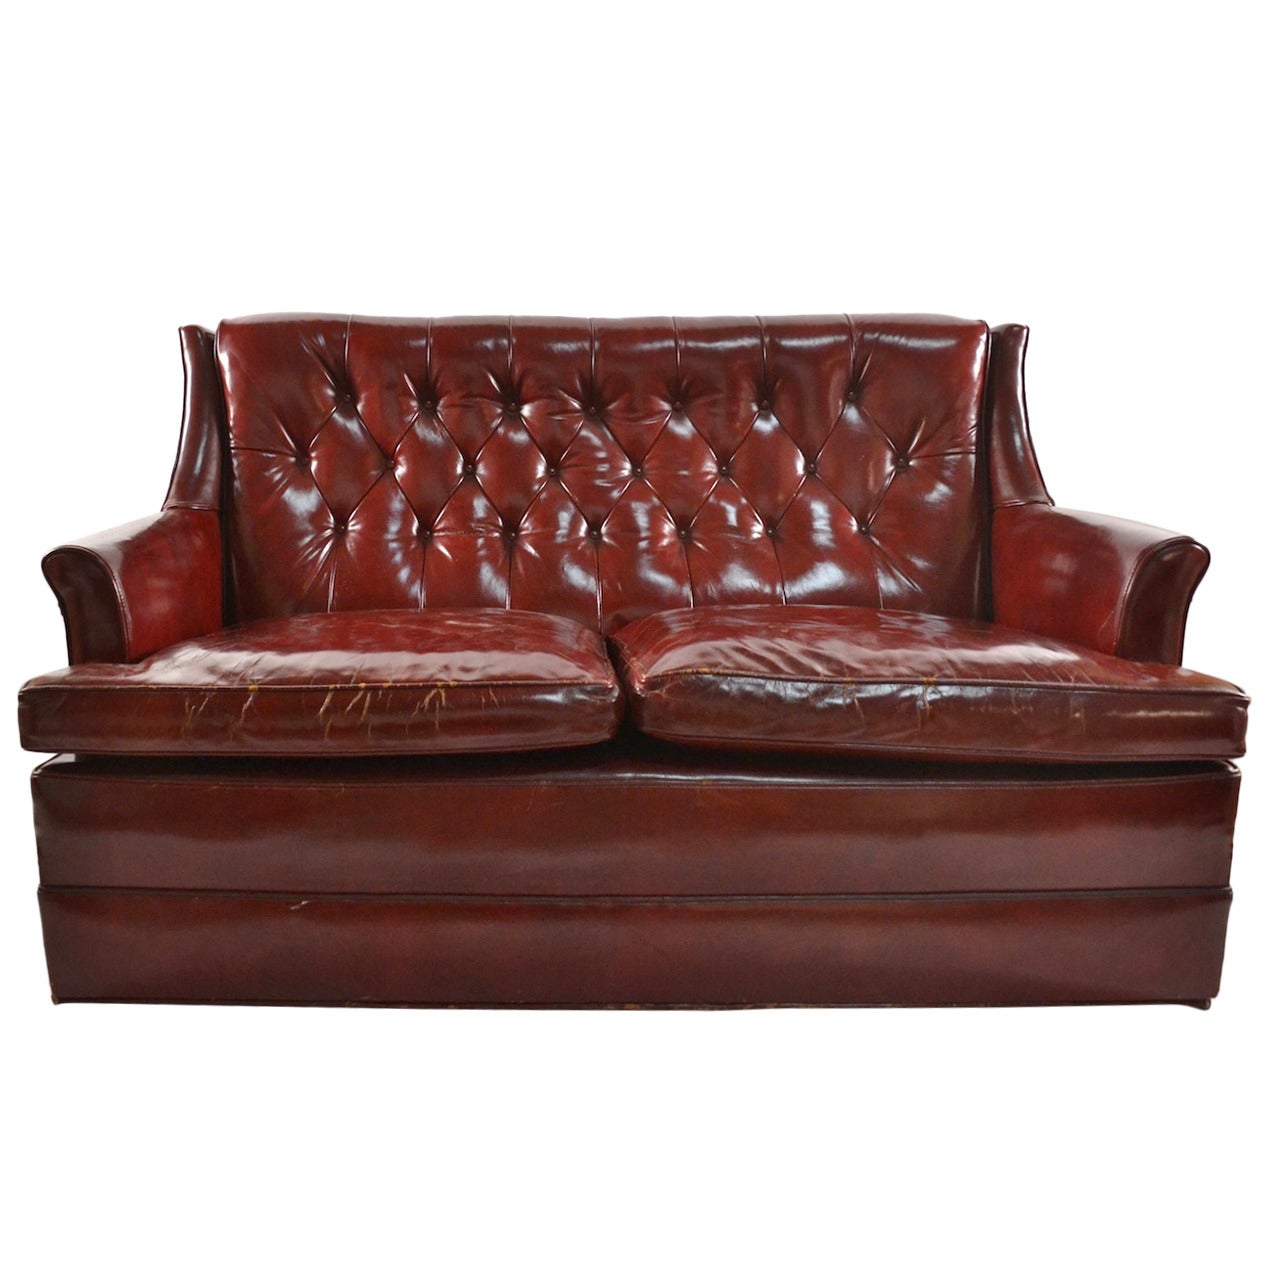 Vintage Leather Love Seat Sofa with Button Tufted Back